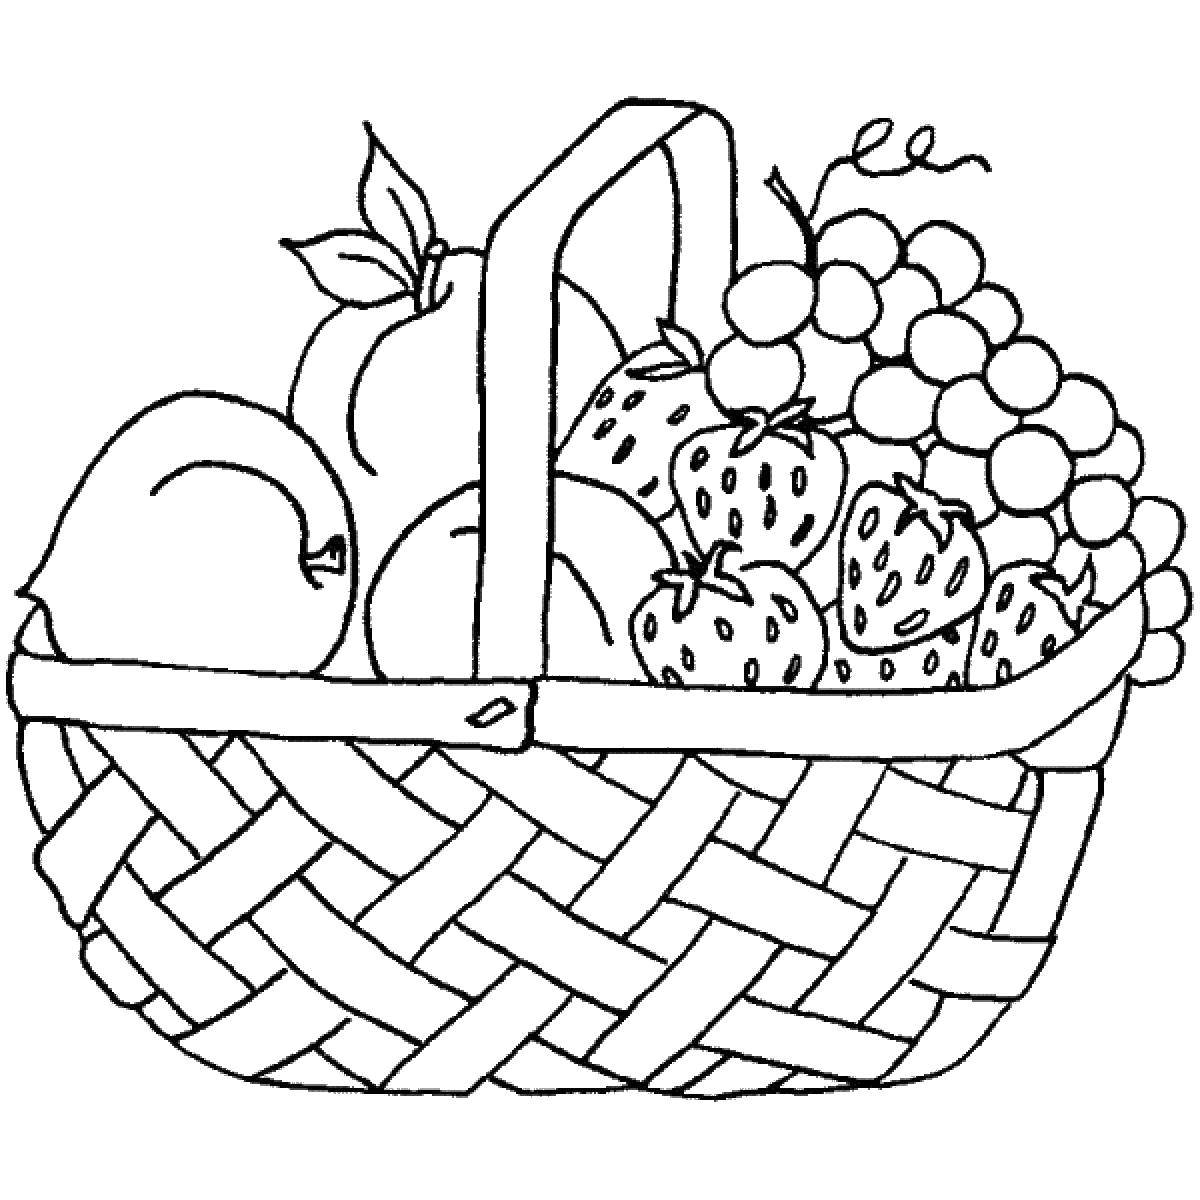 Coloring Fruits and berries in the basket. Category fruits. Tags:  basket, fruit, berries.